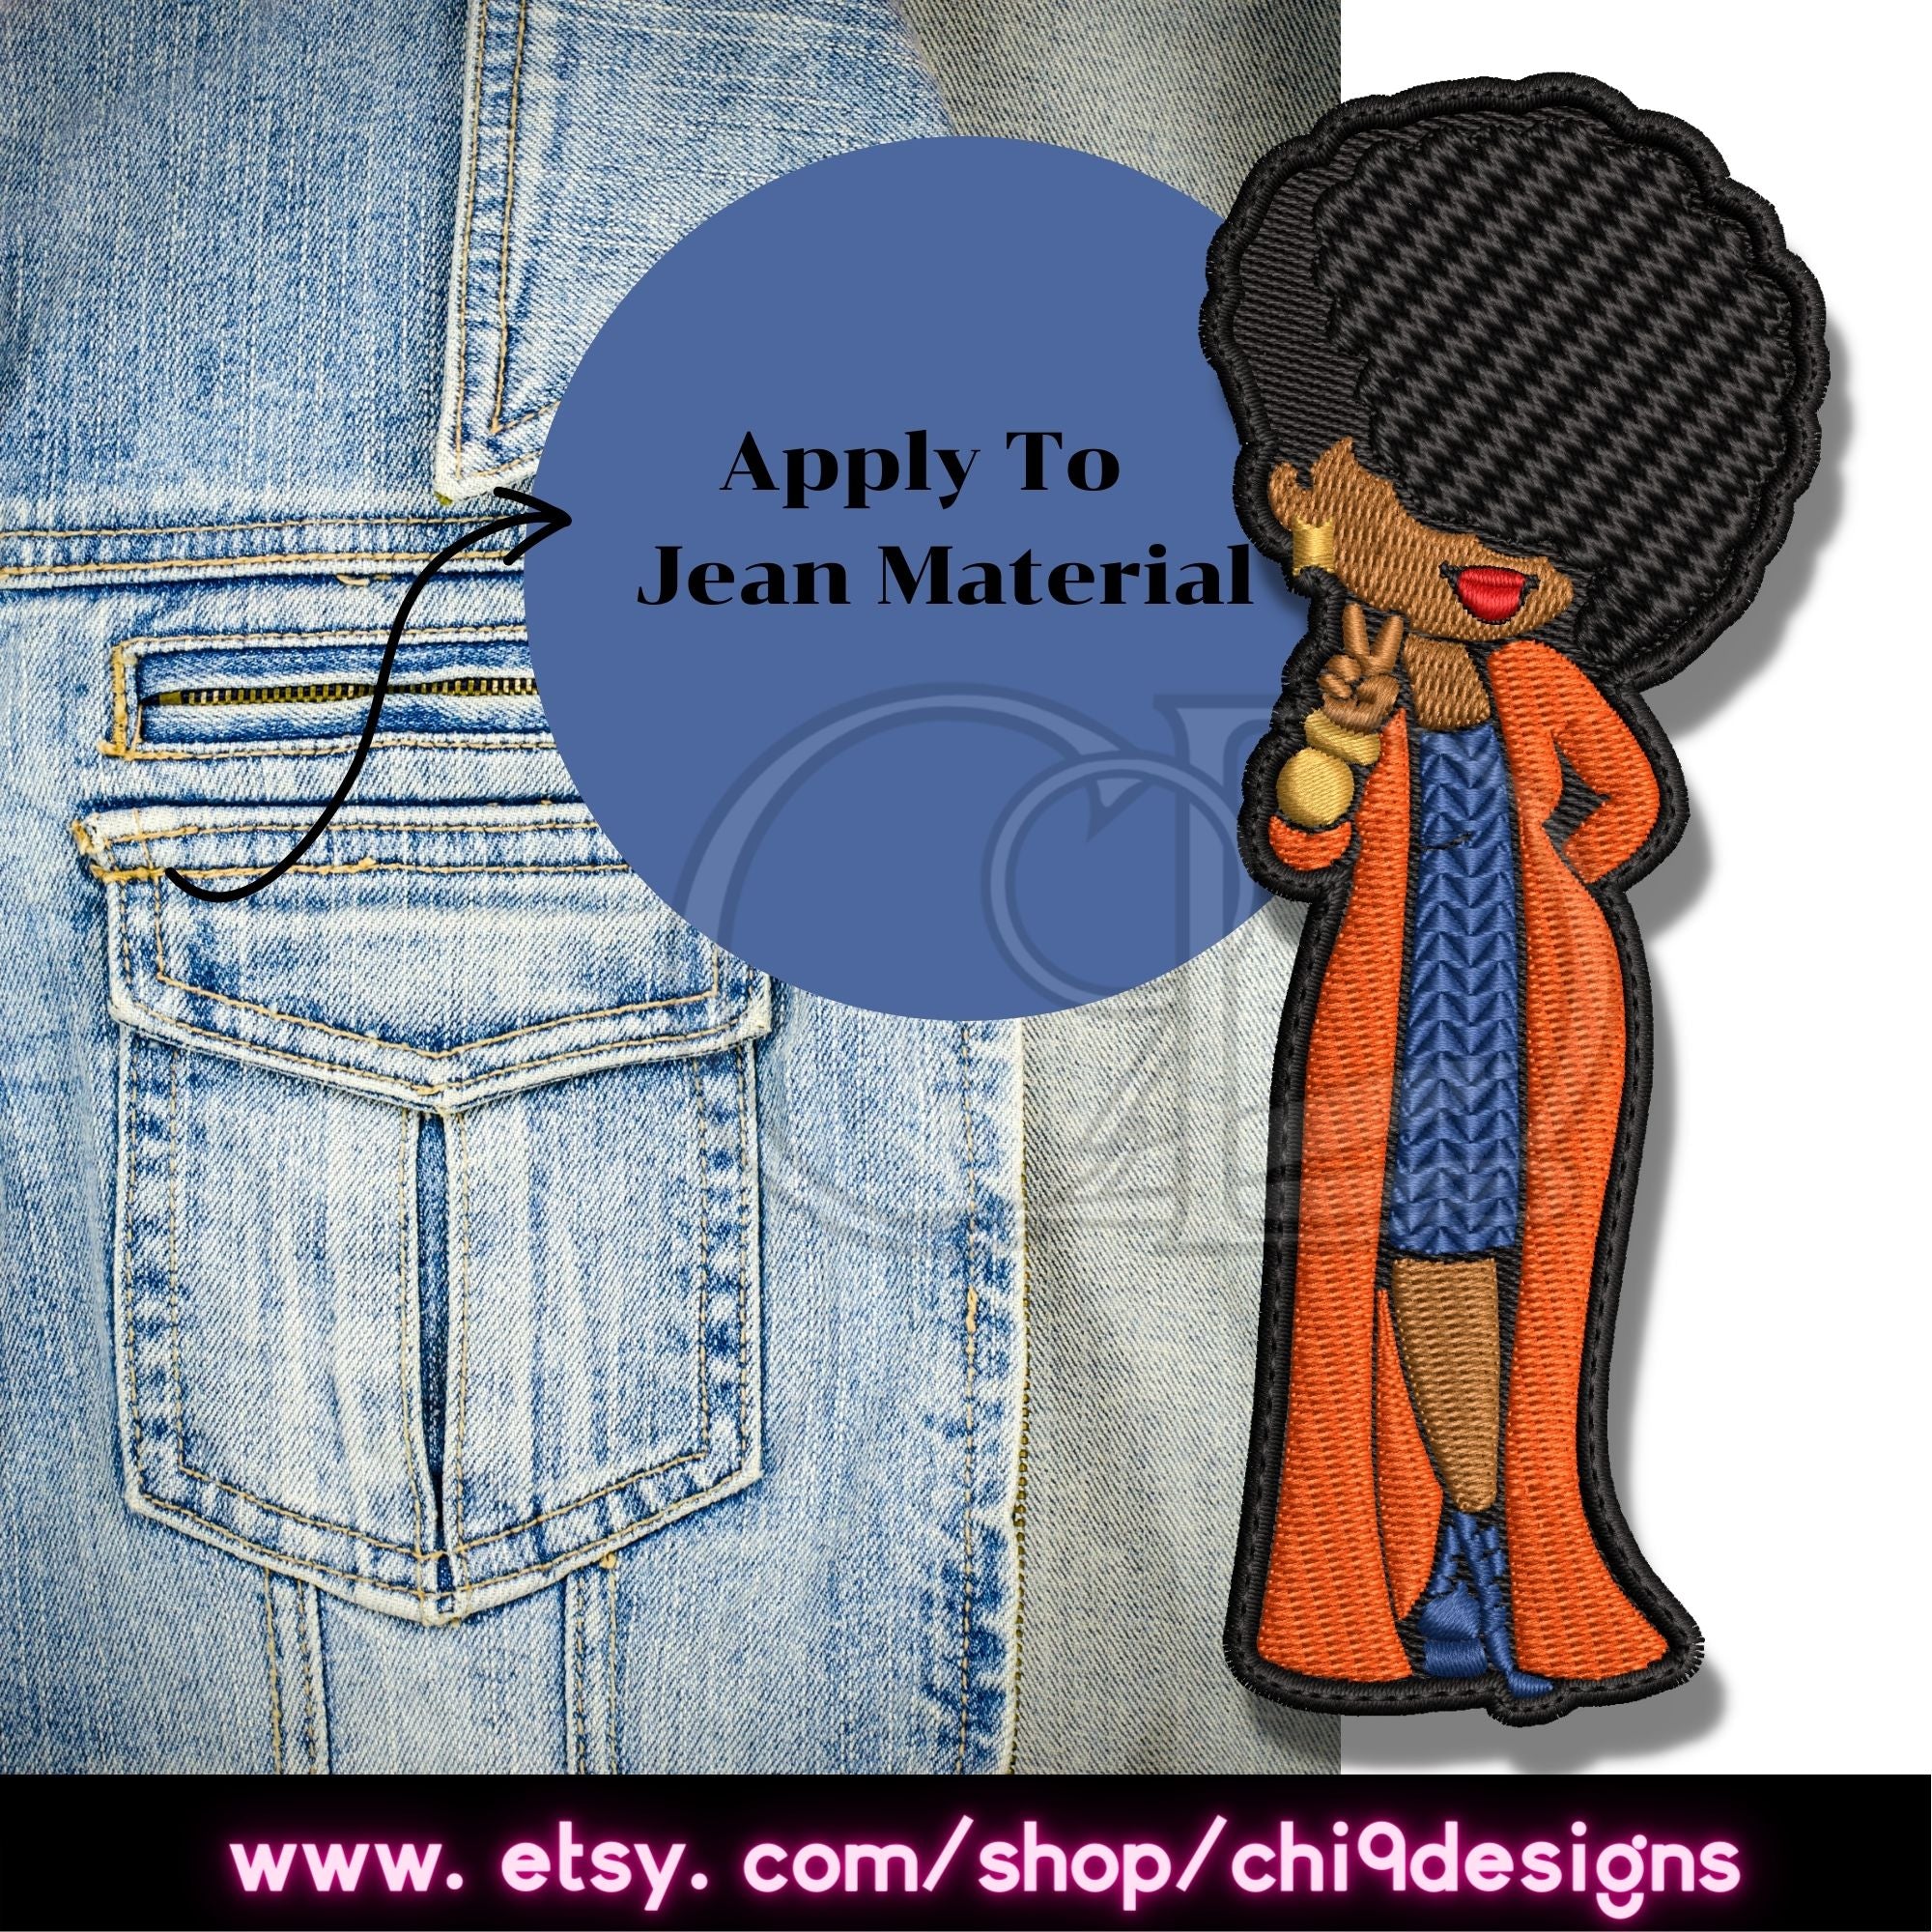 Melanin Duster Embroidered Patch with Blue and Gold Clothes